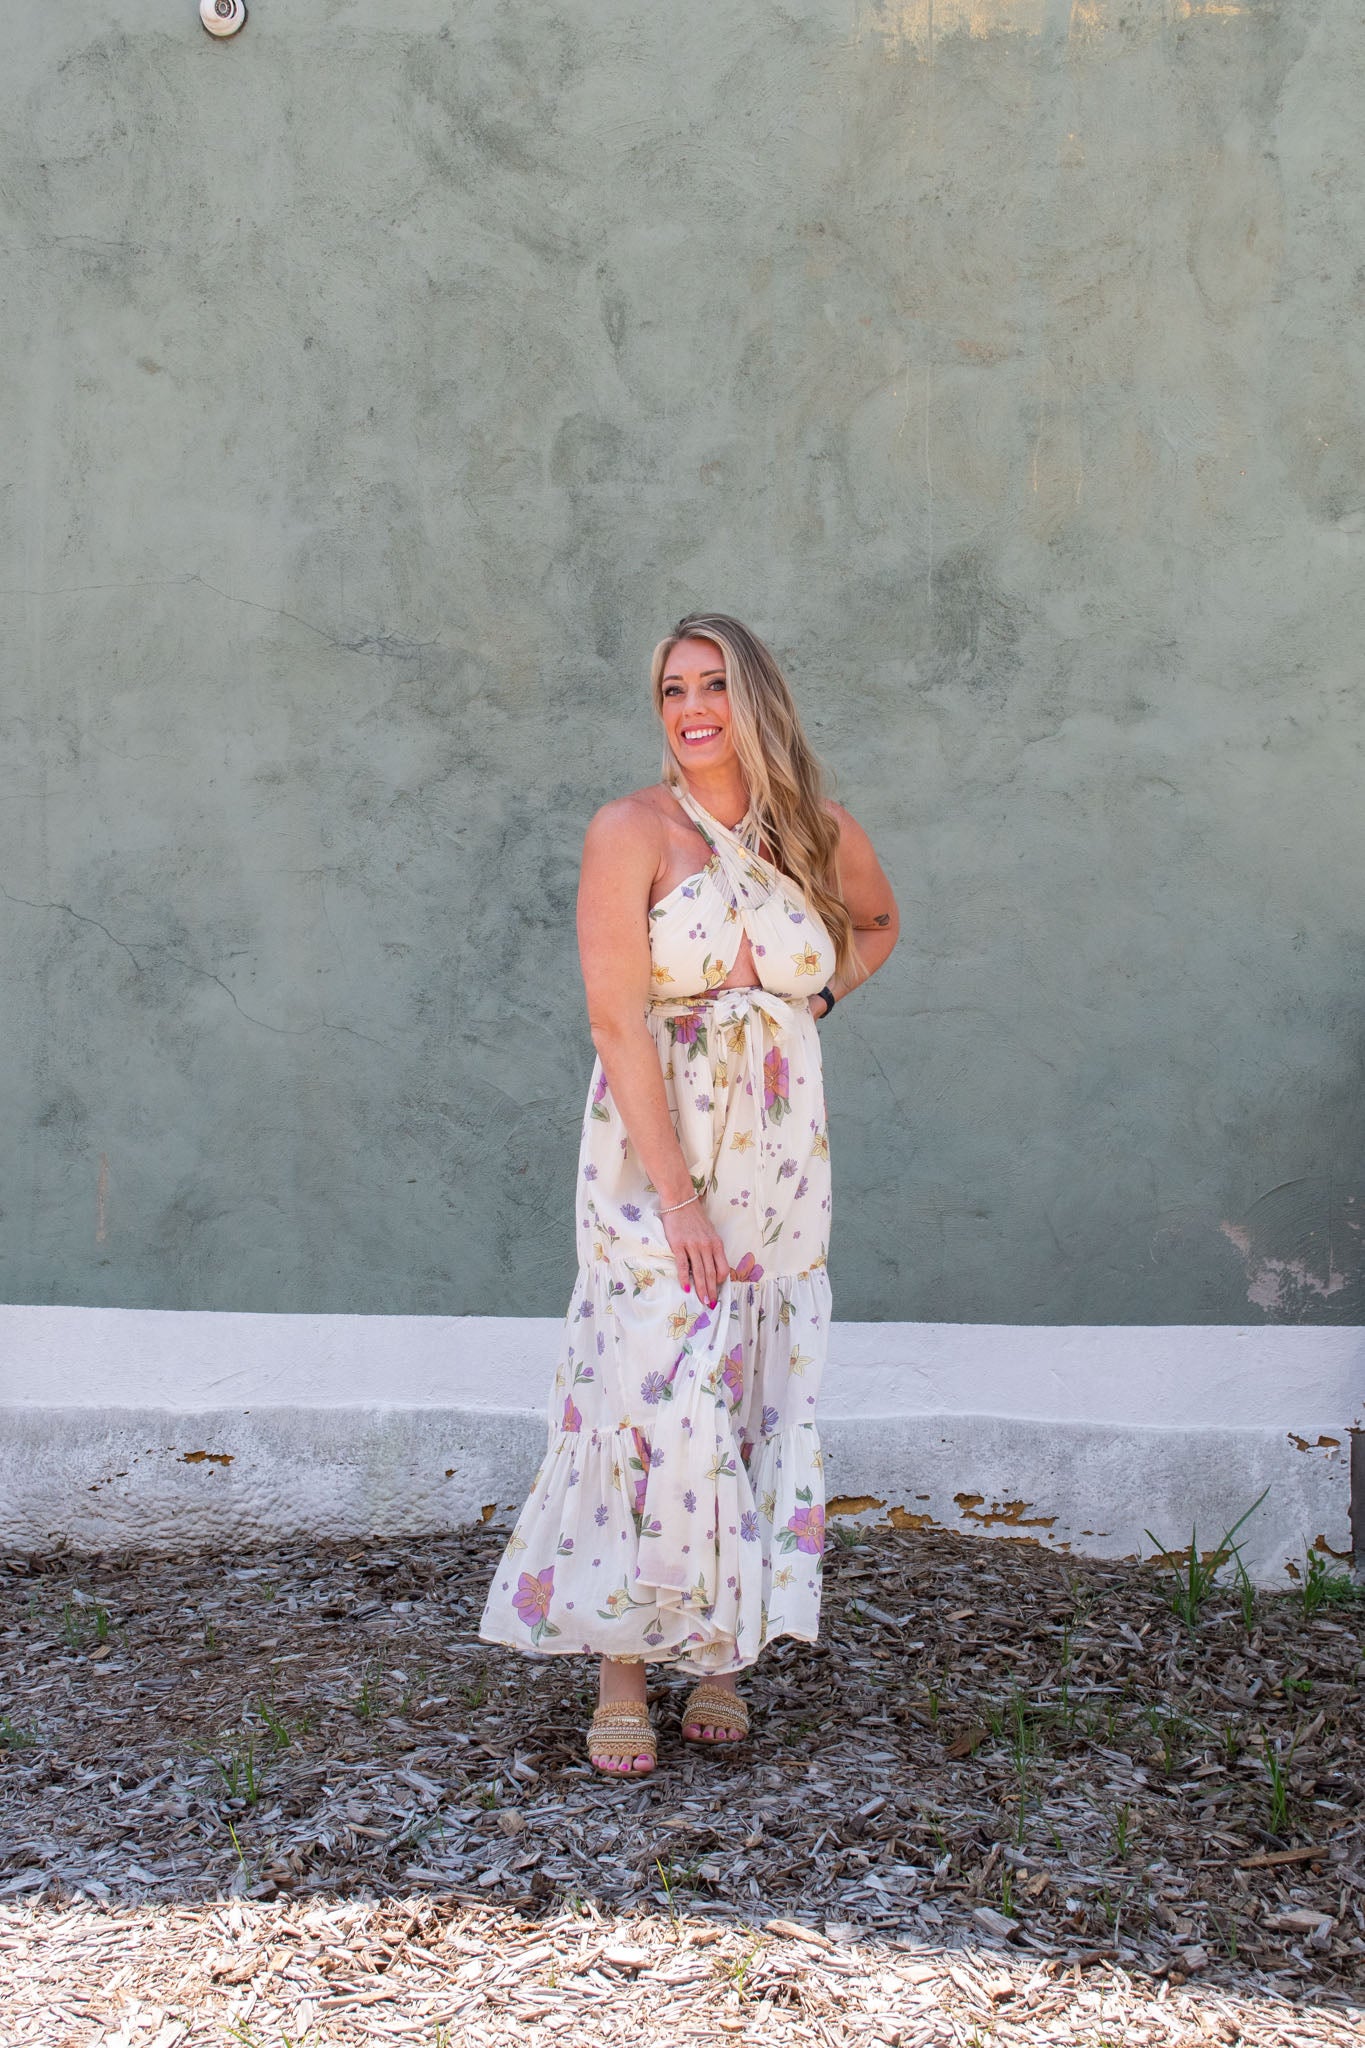 A model wearing a cream maxi skirt/dress with an allover floral print.She paired it with slip on sandals.